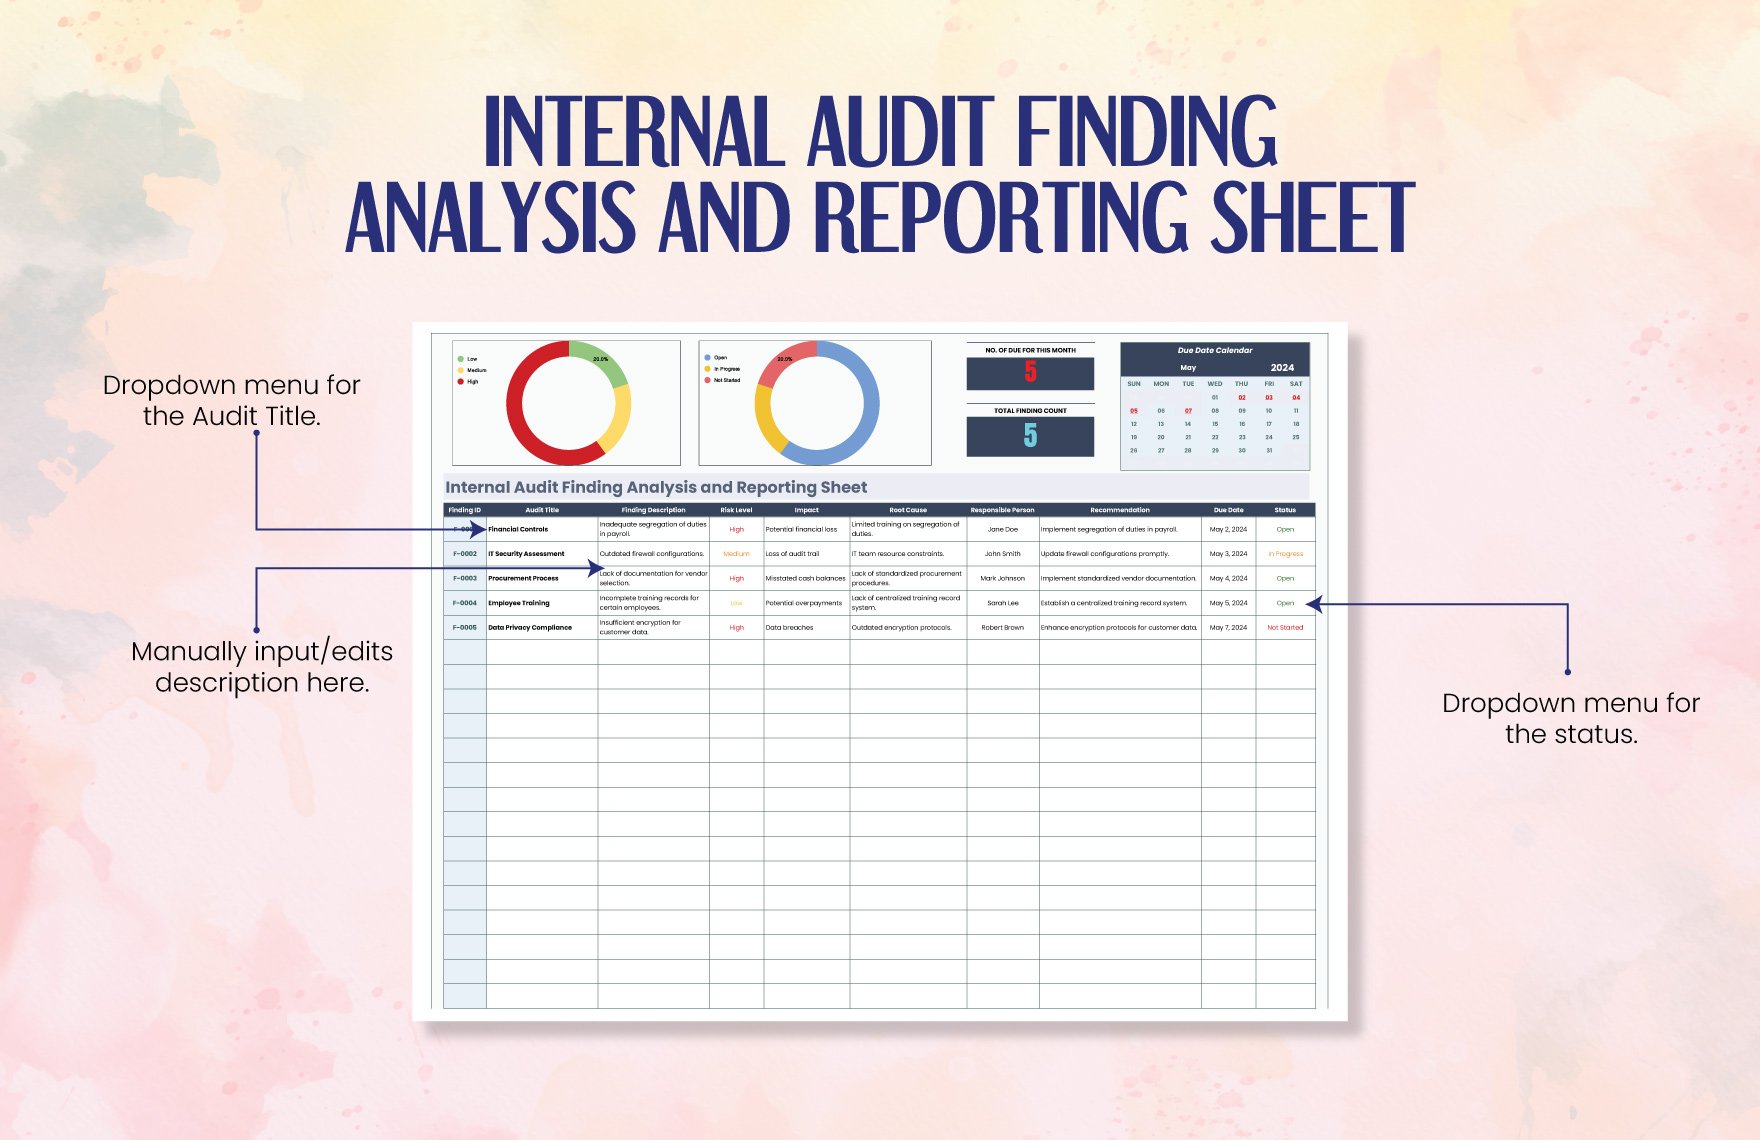 Internal Audit Finding Analysis and Reporting Sheet Template